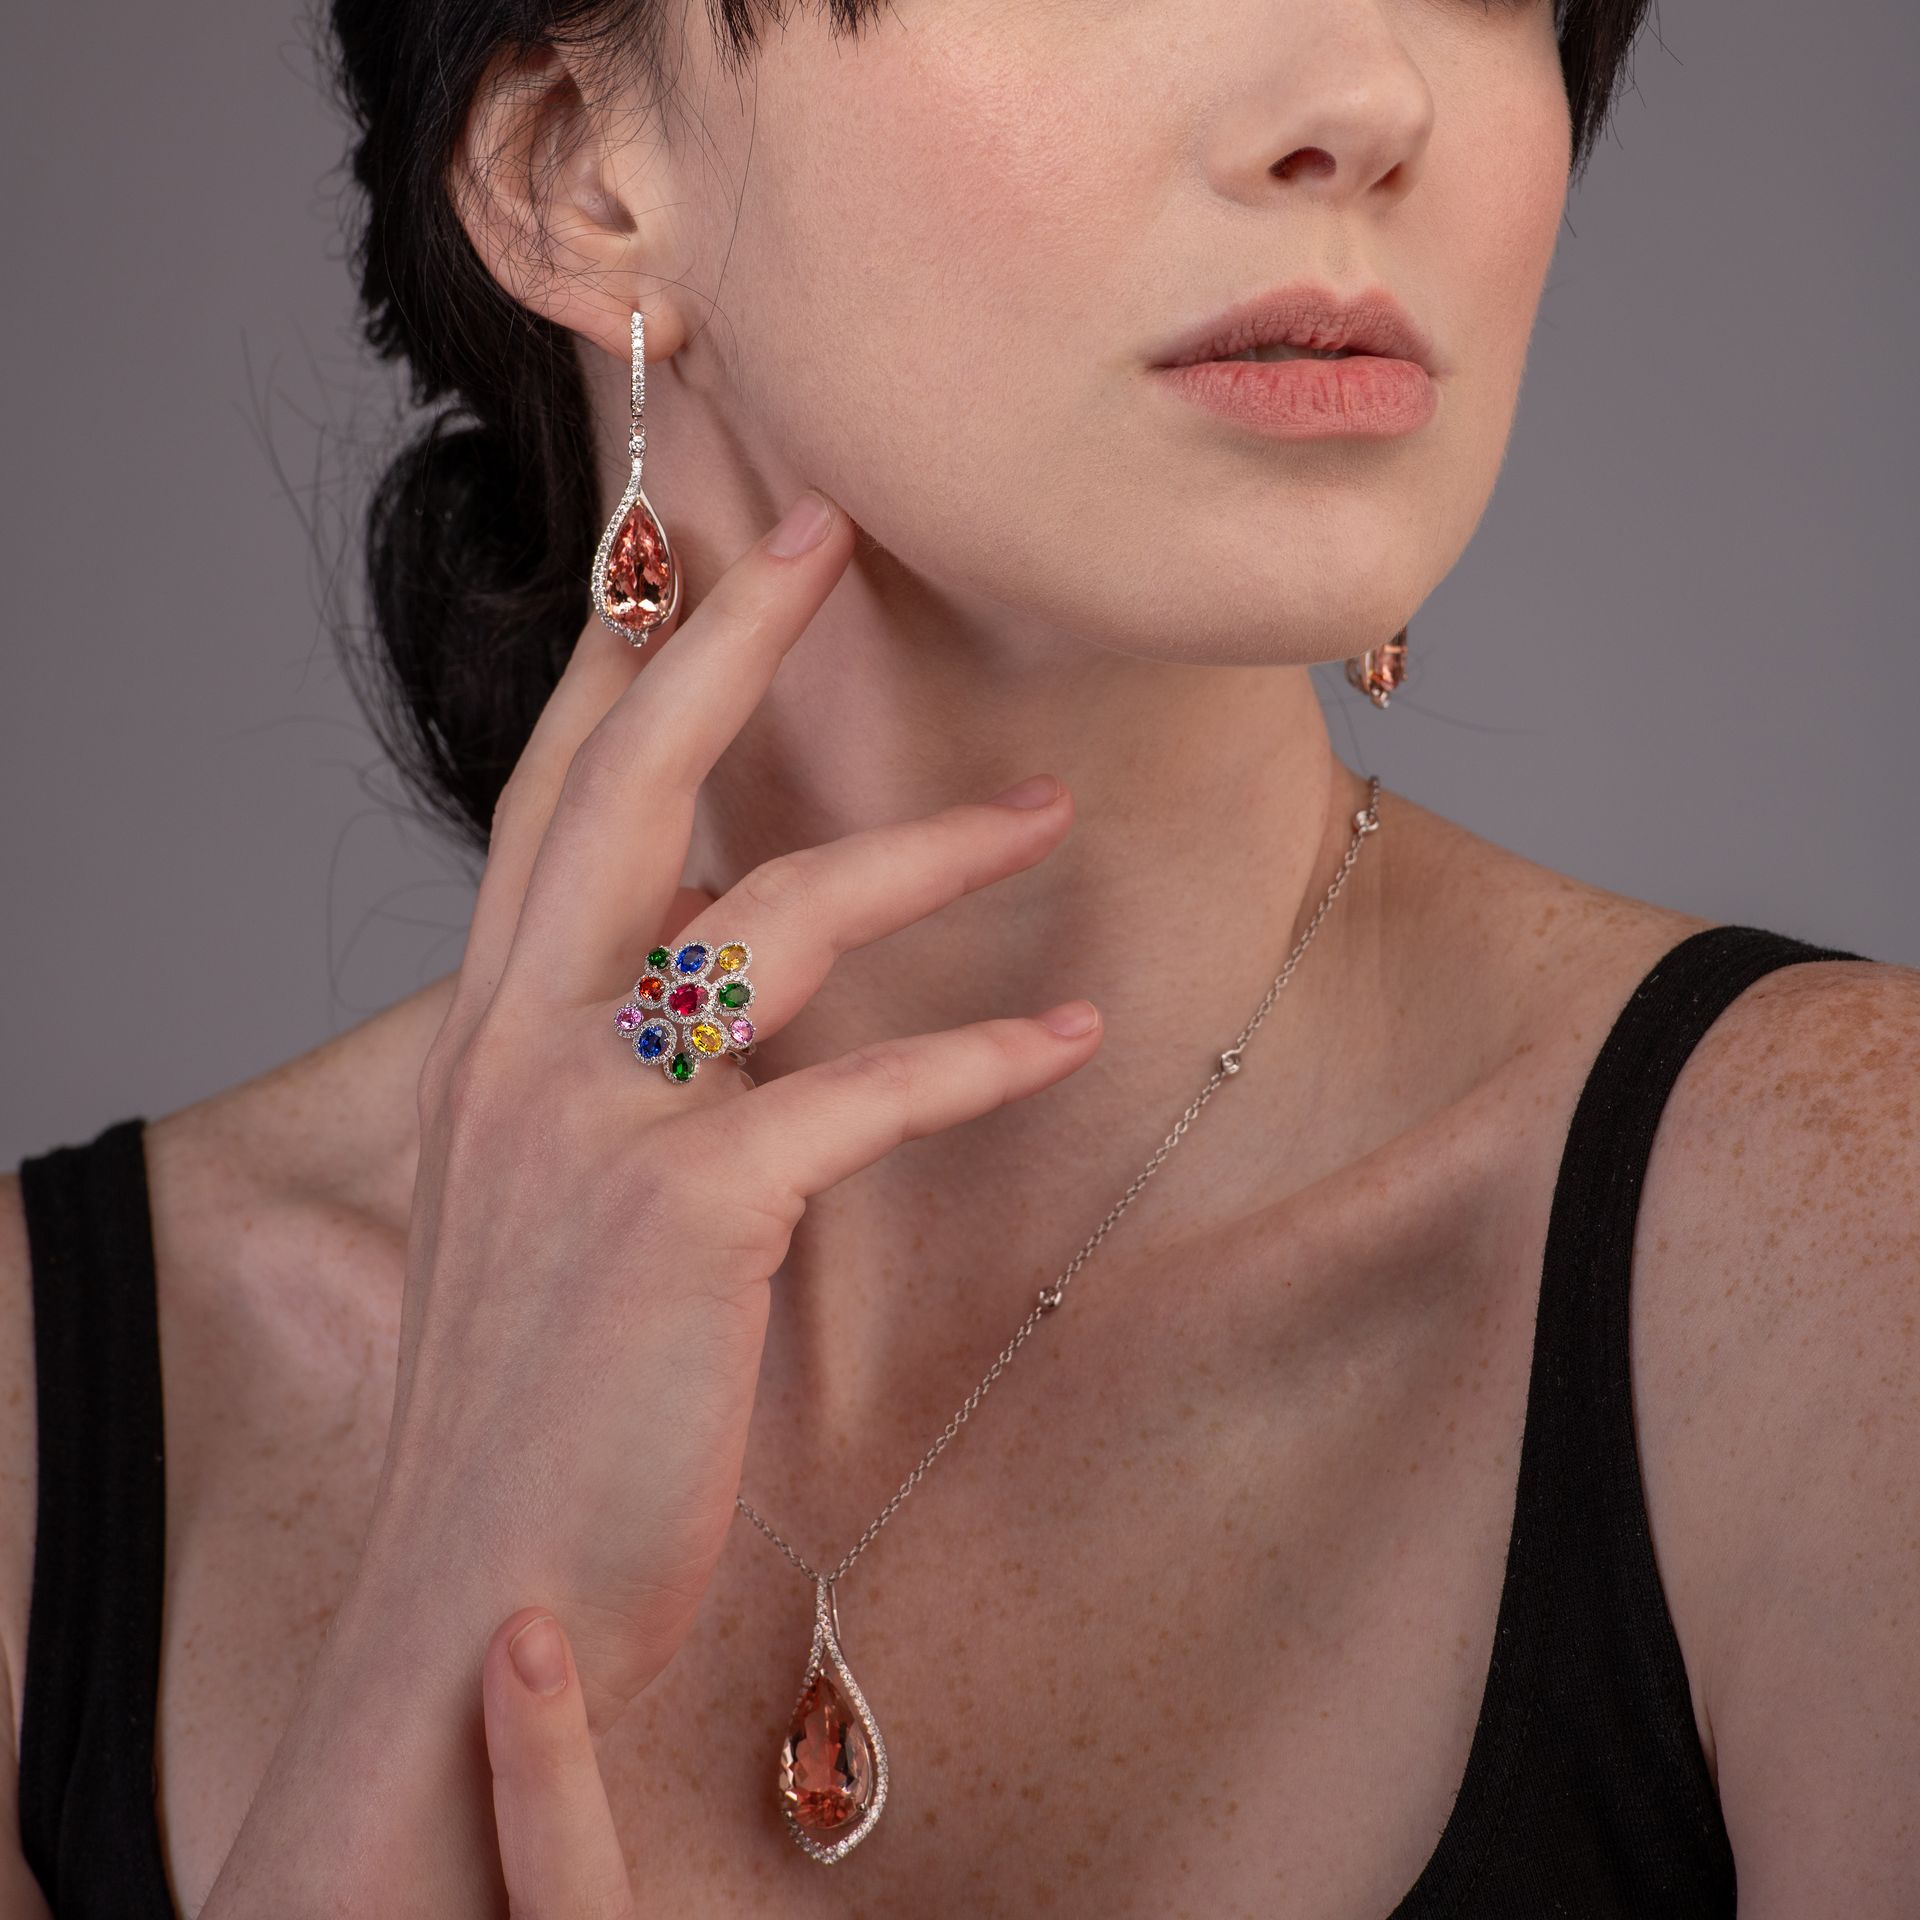 A woman wearing a necklace and earrings has a ring on her finger